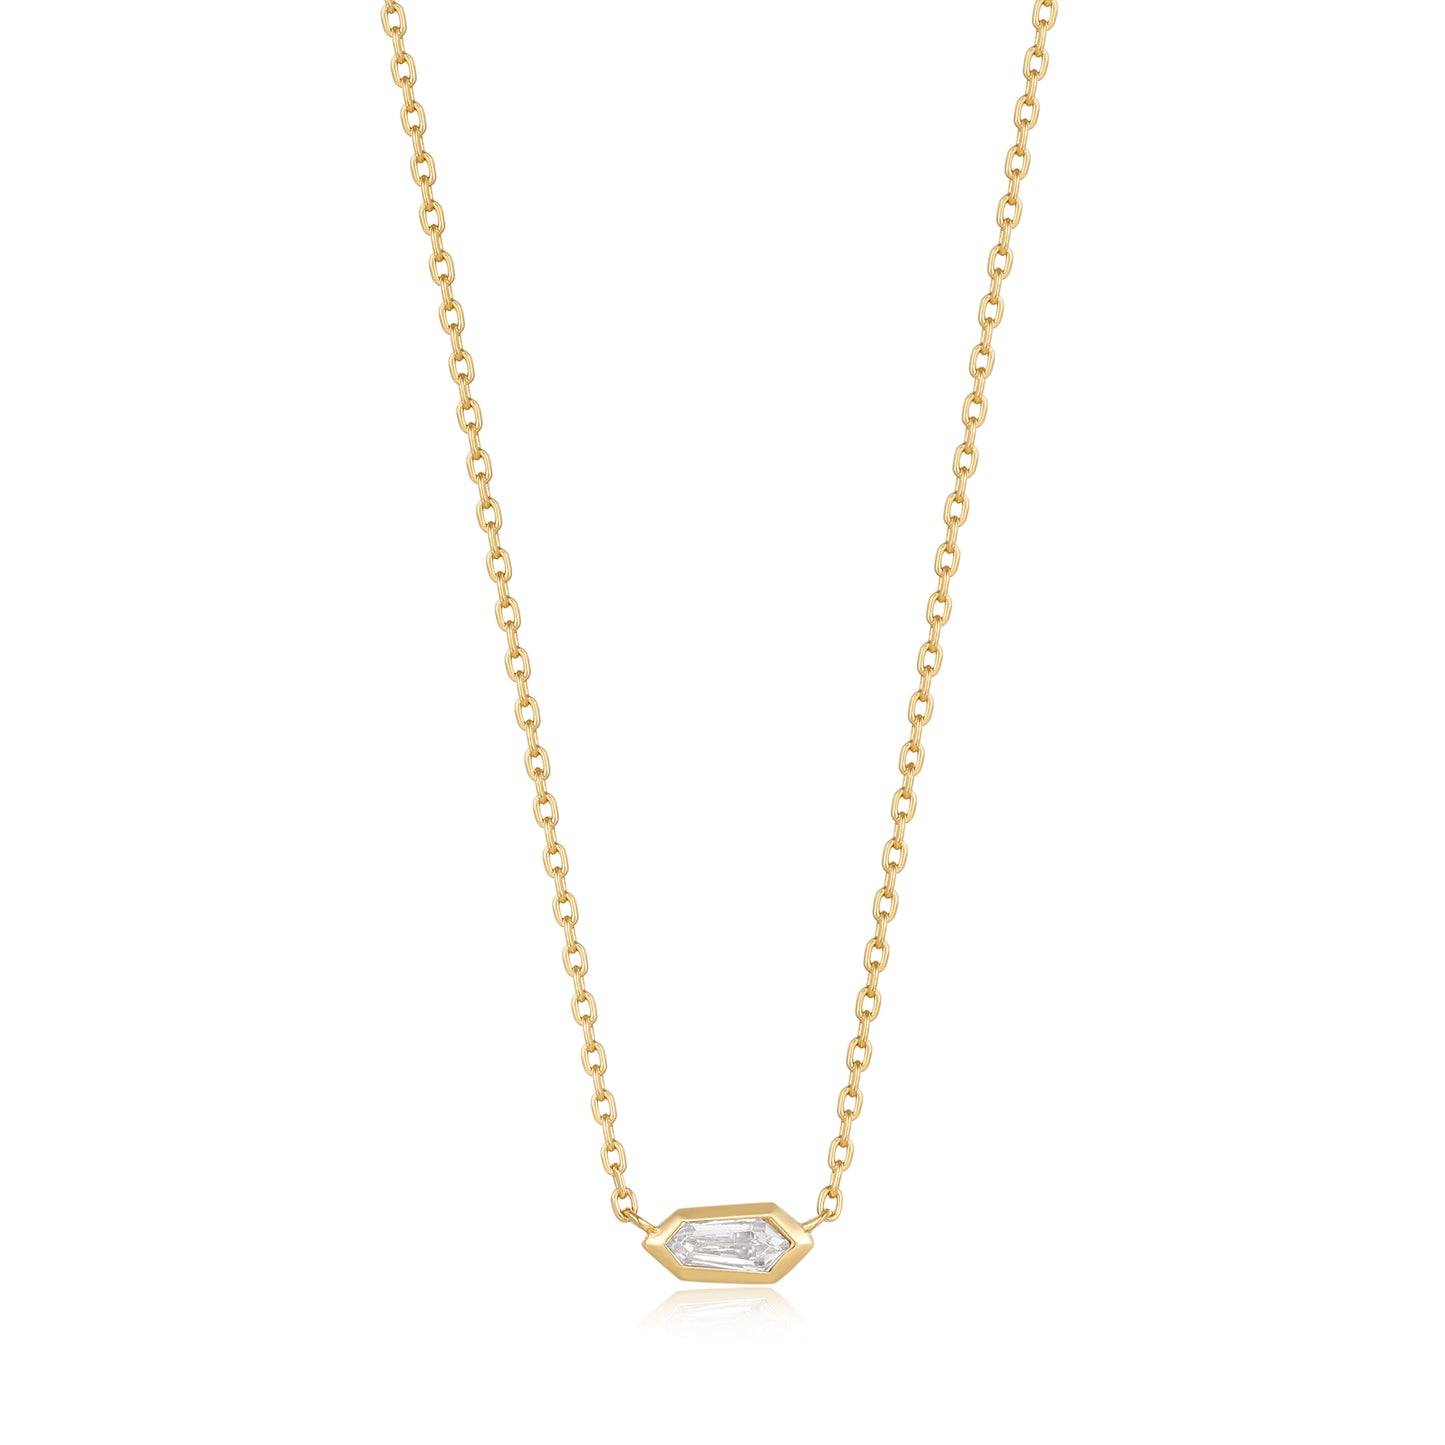 Ania Haie Gold Sparkle Emblem Chain Necklace - Silver Necklace